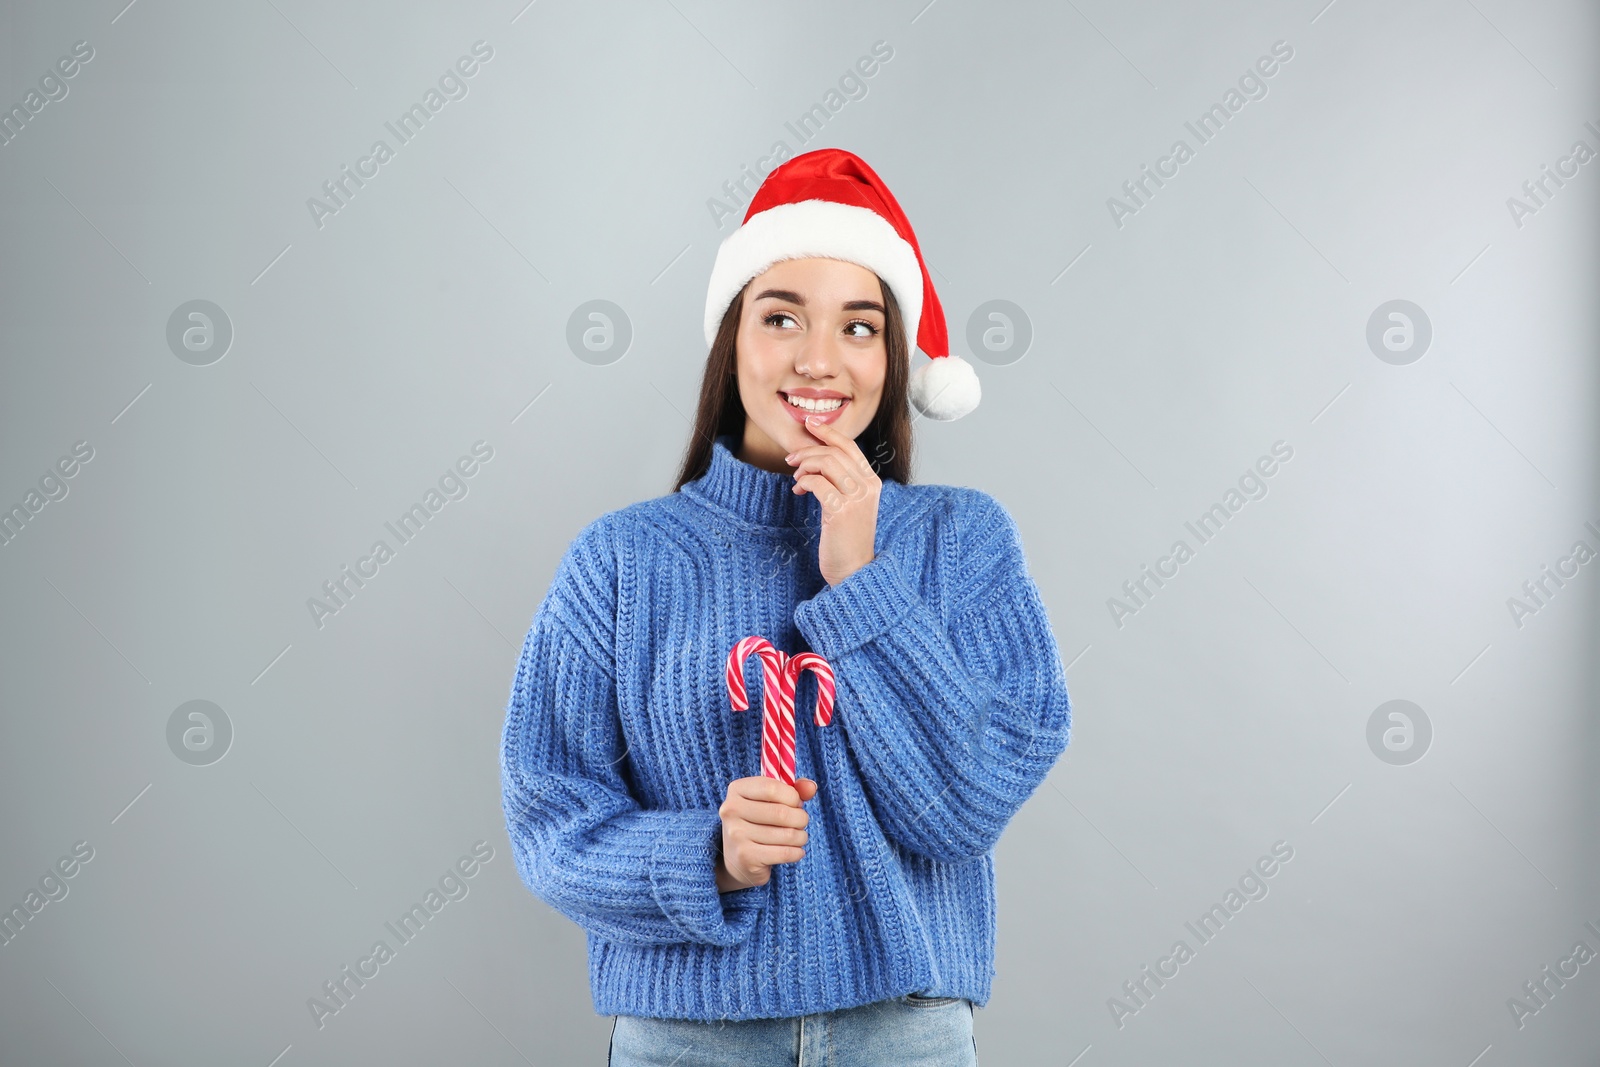 Photo of Young woman in blue sweater and Santa hat holding candy canes on grey background. Celebrating Christmas